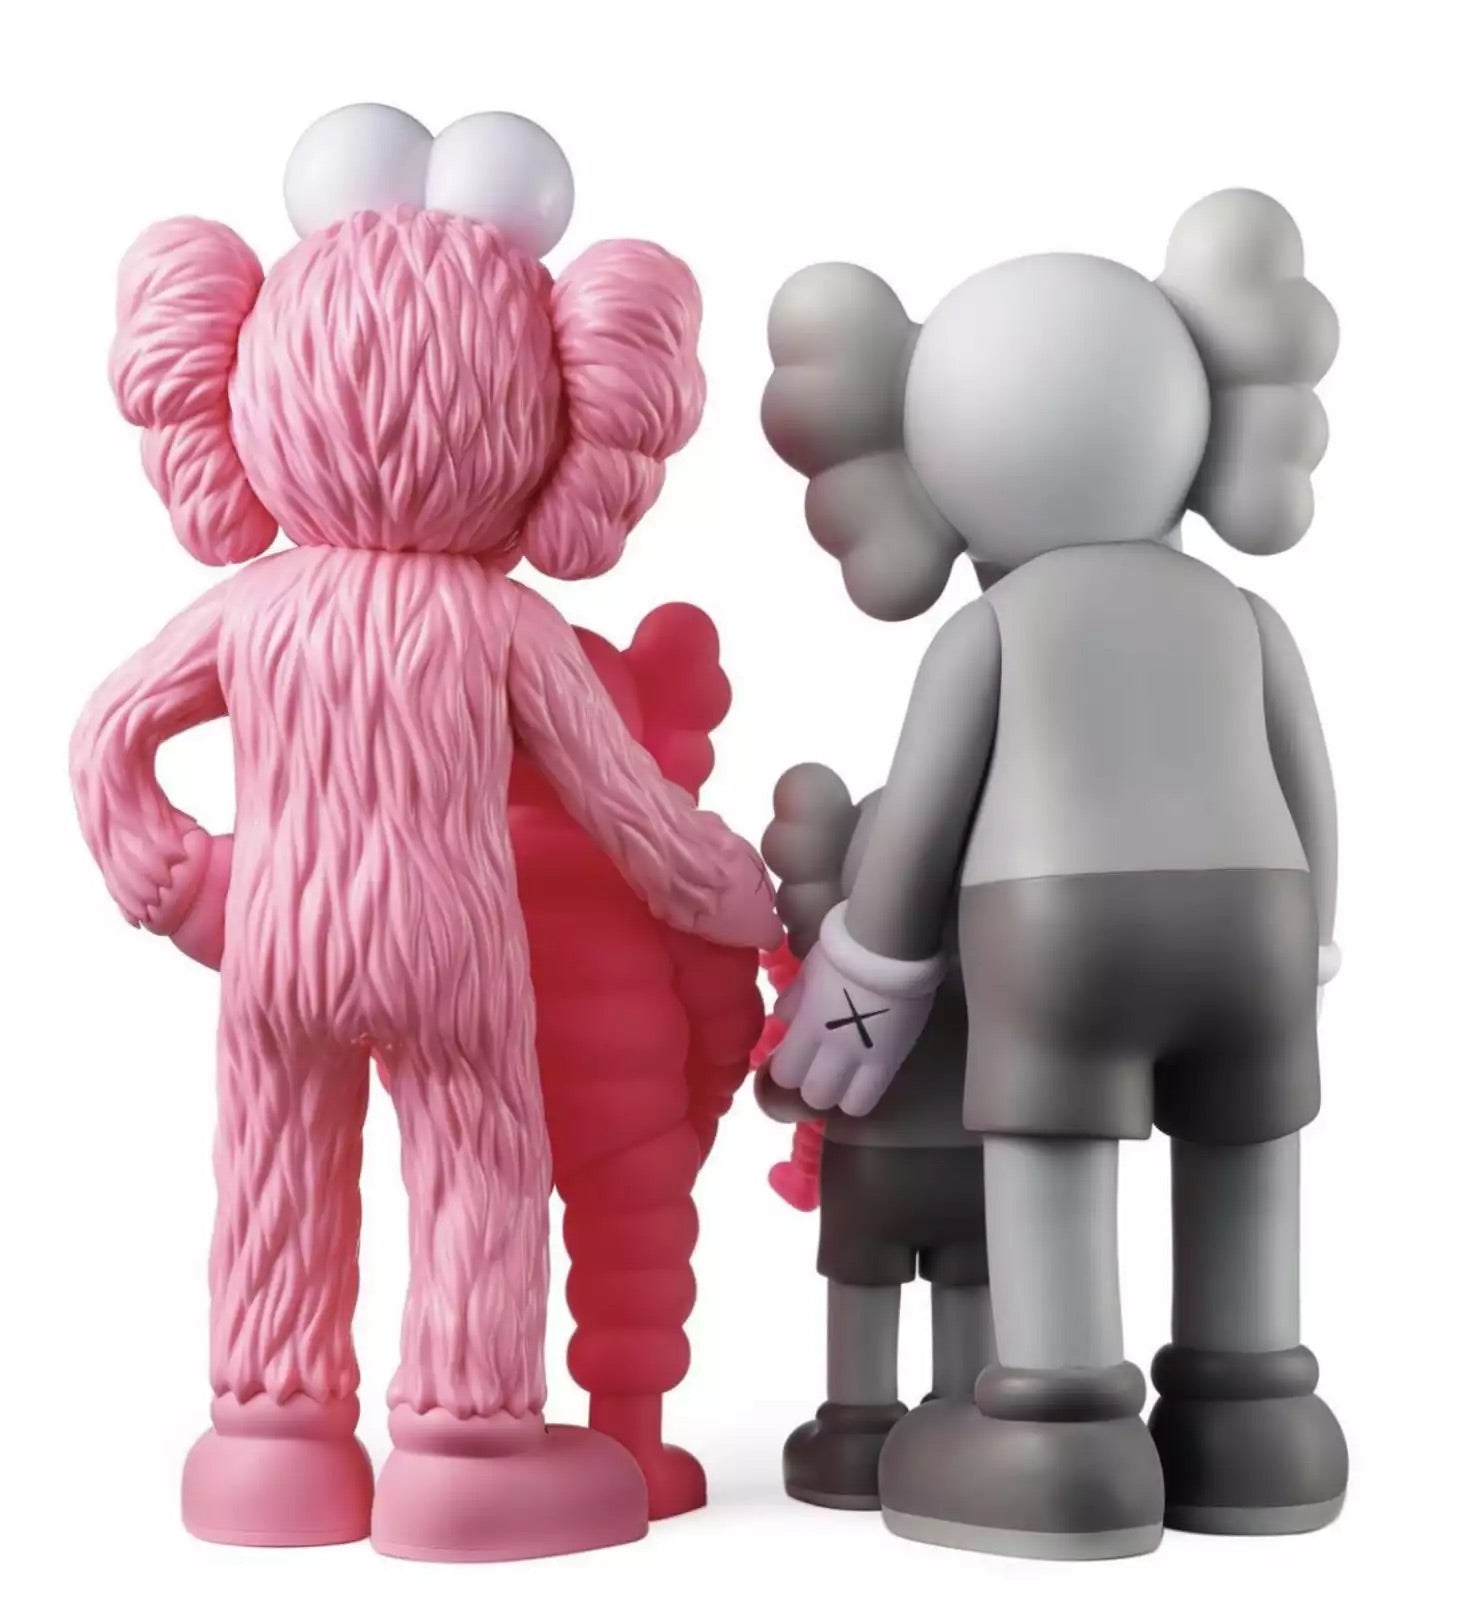 KAWS Signed Plush Companion Available For Immediate Sale At Sotheby's